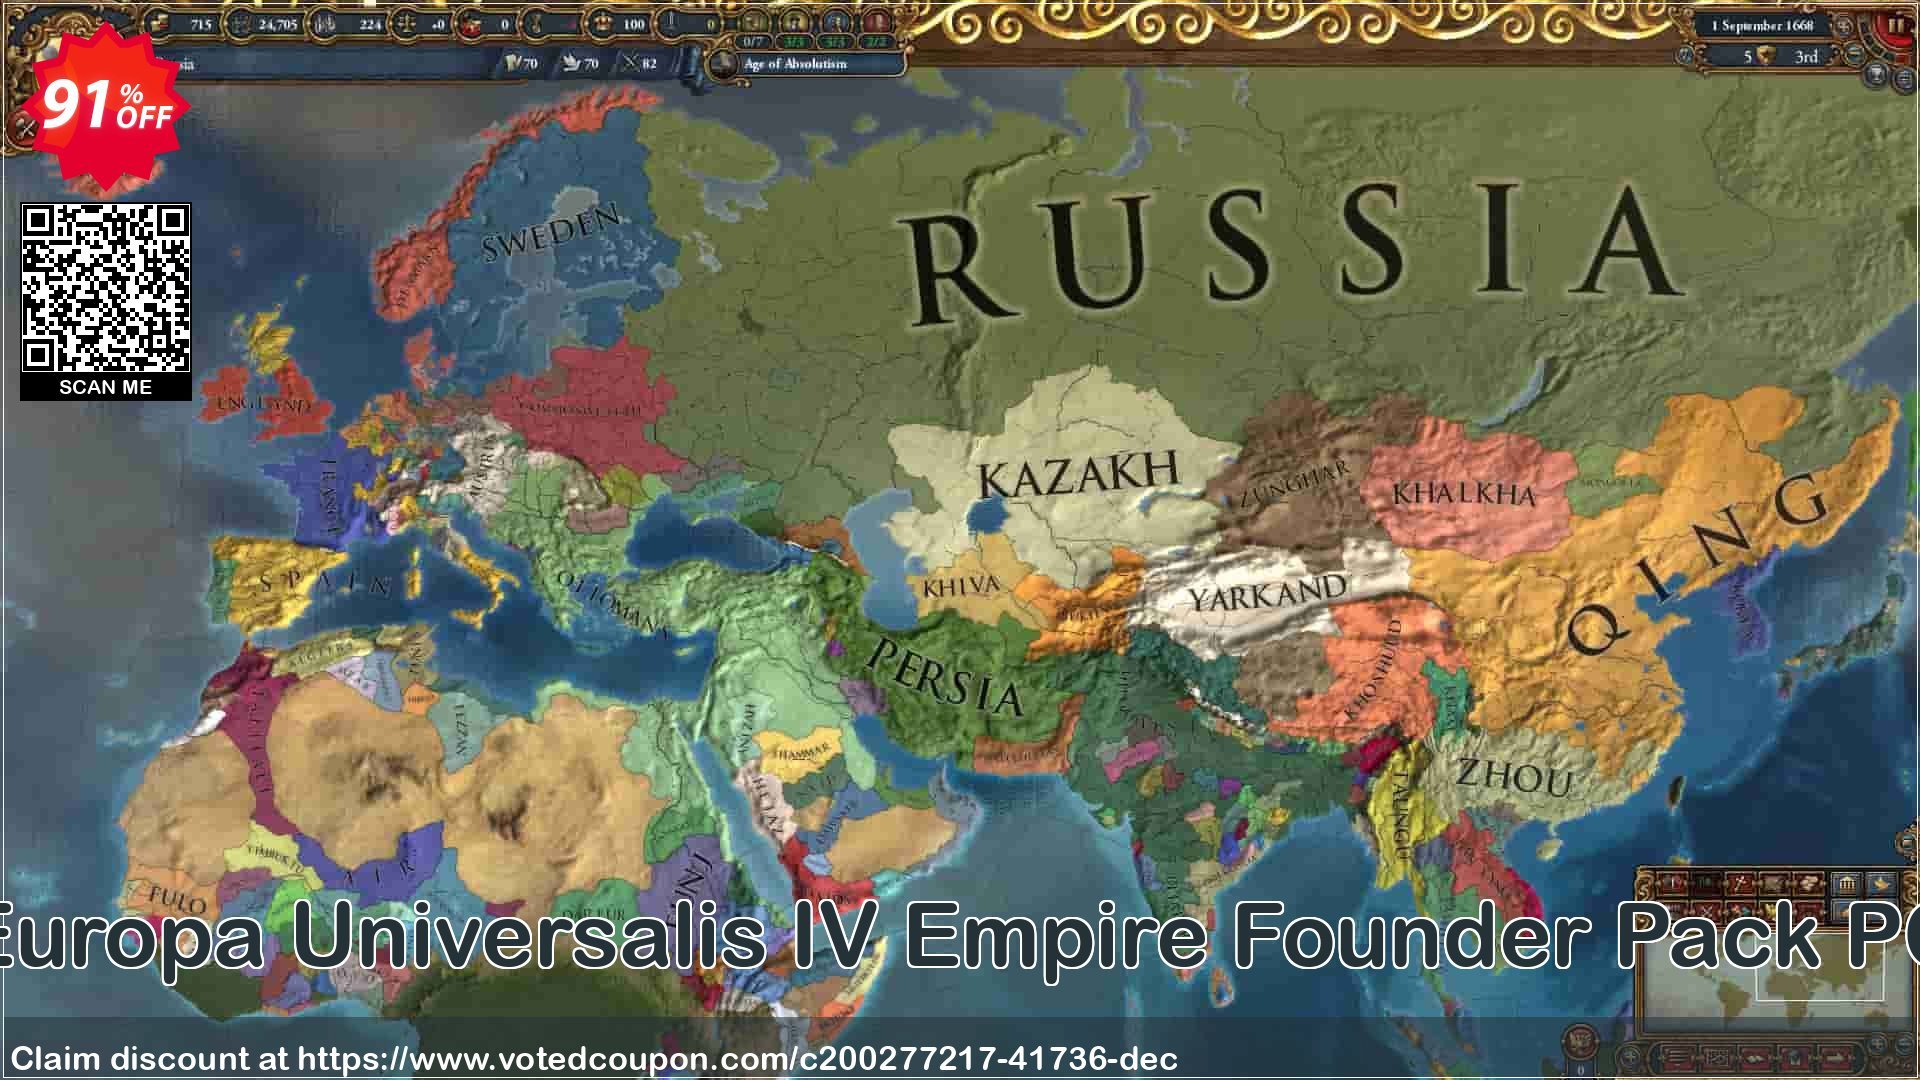 Europa Universalis IV Empire Founder Pack PC voted-on promotion codes